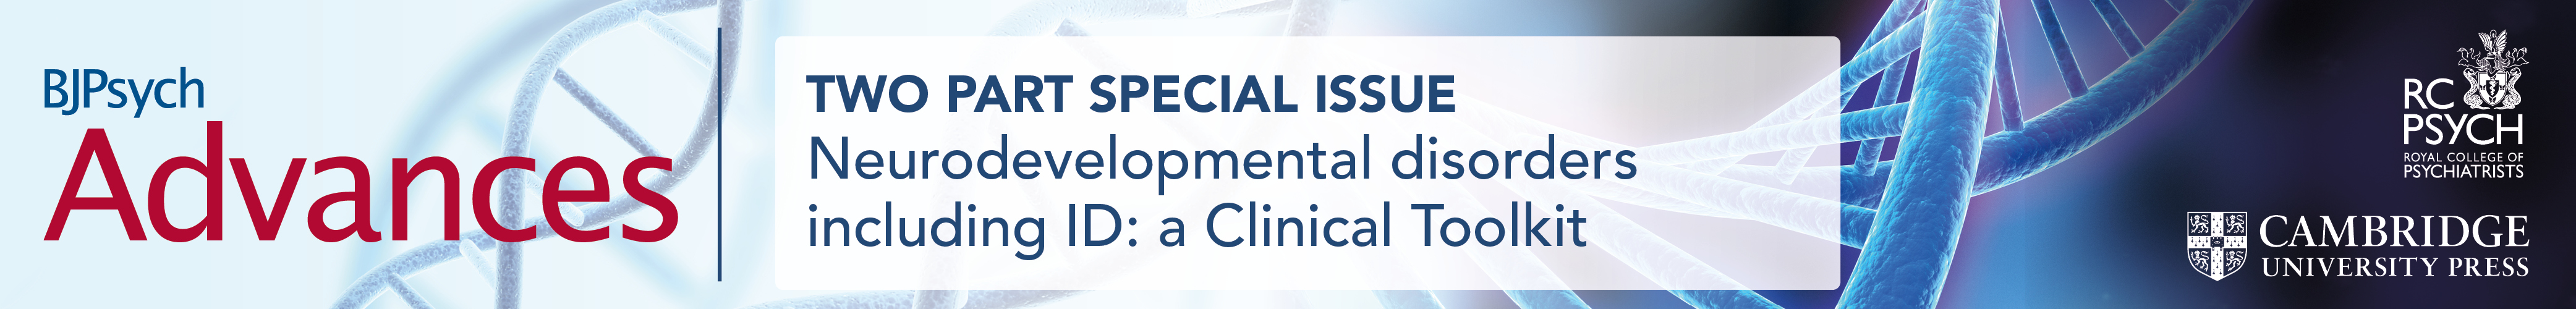 Click to explore the two part special issue on Neurodevelopmental Disorders including intellectual disability